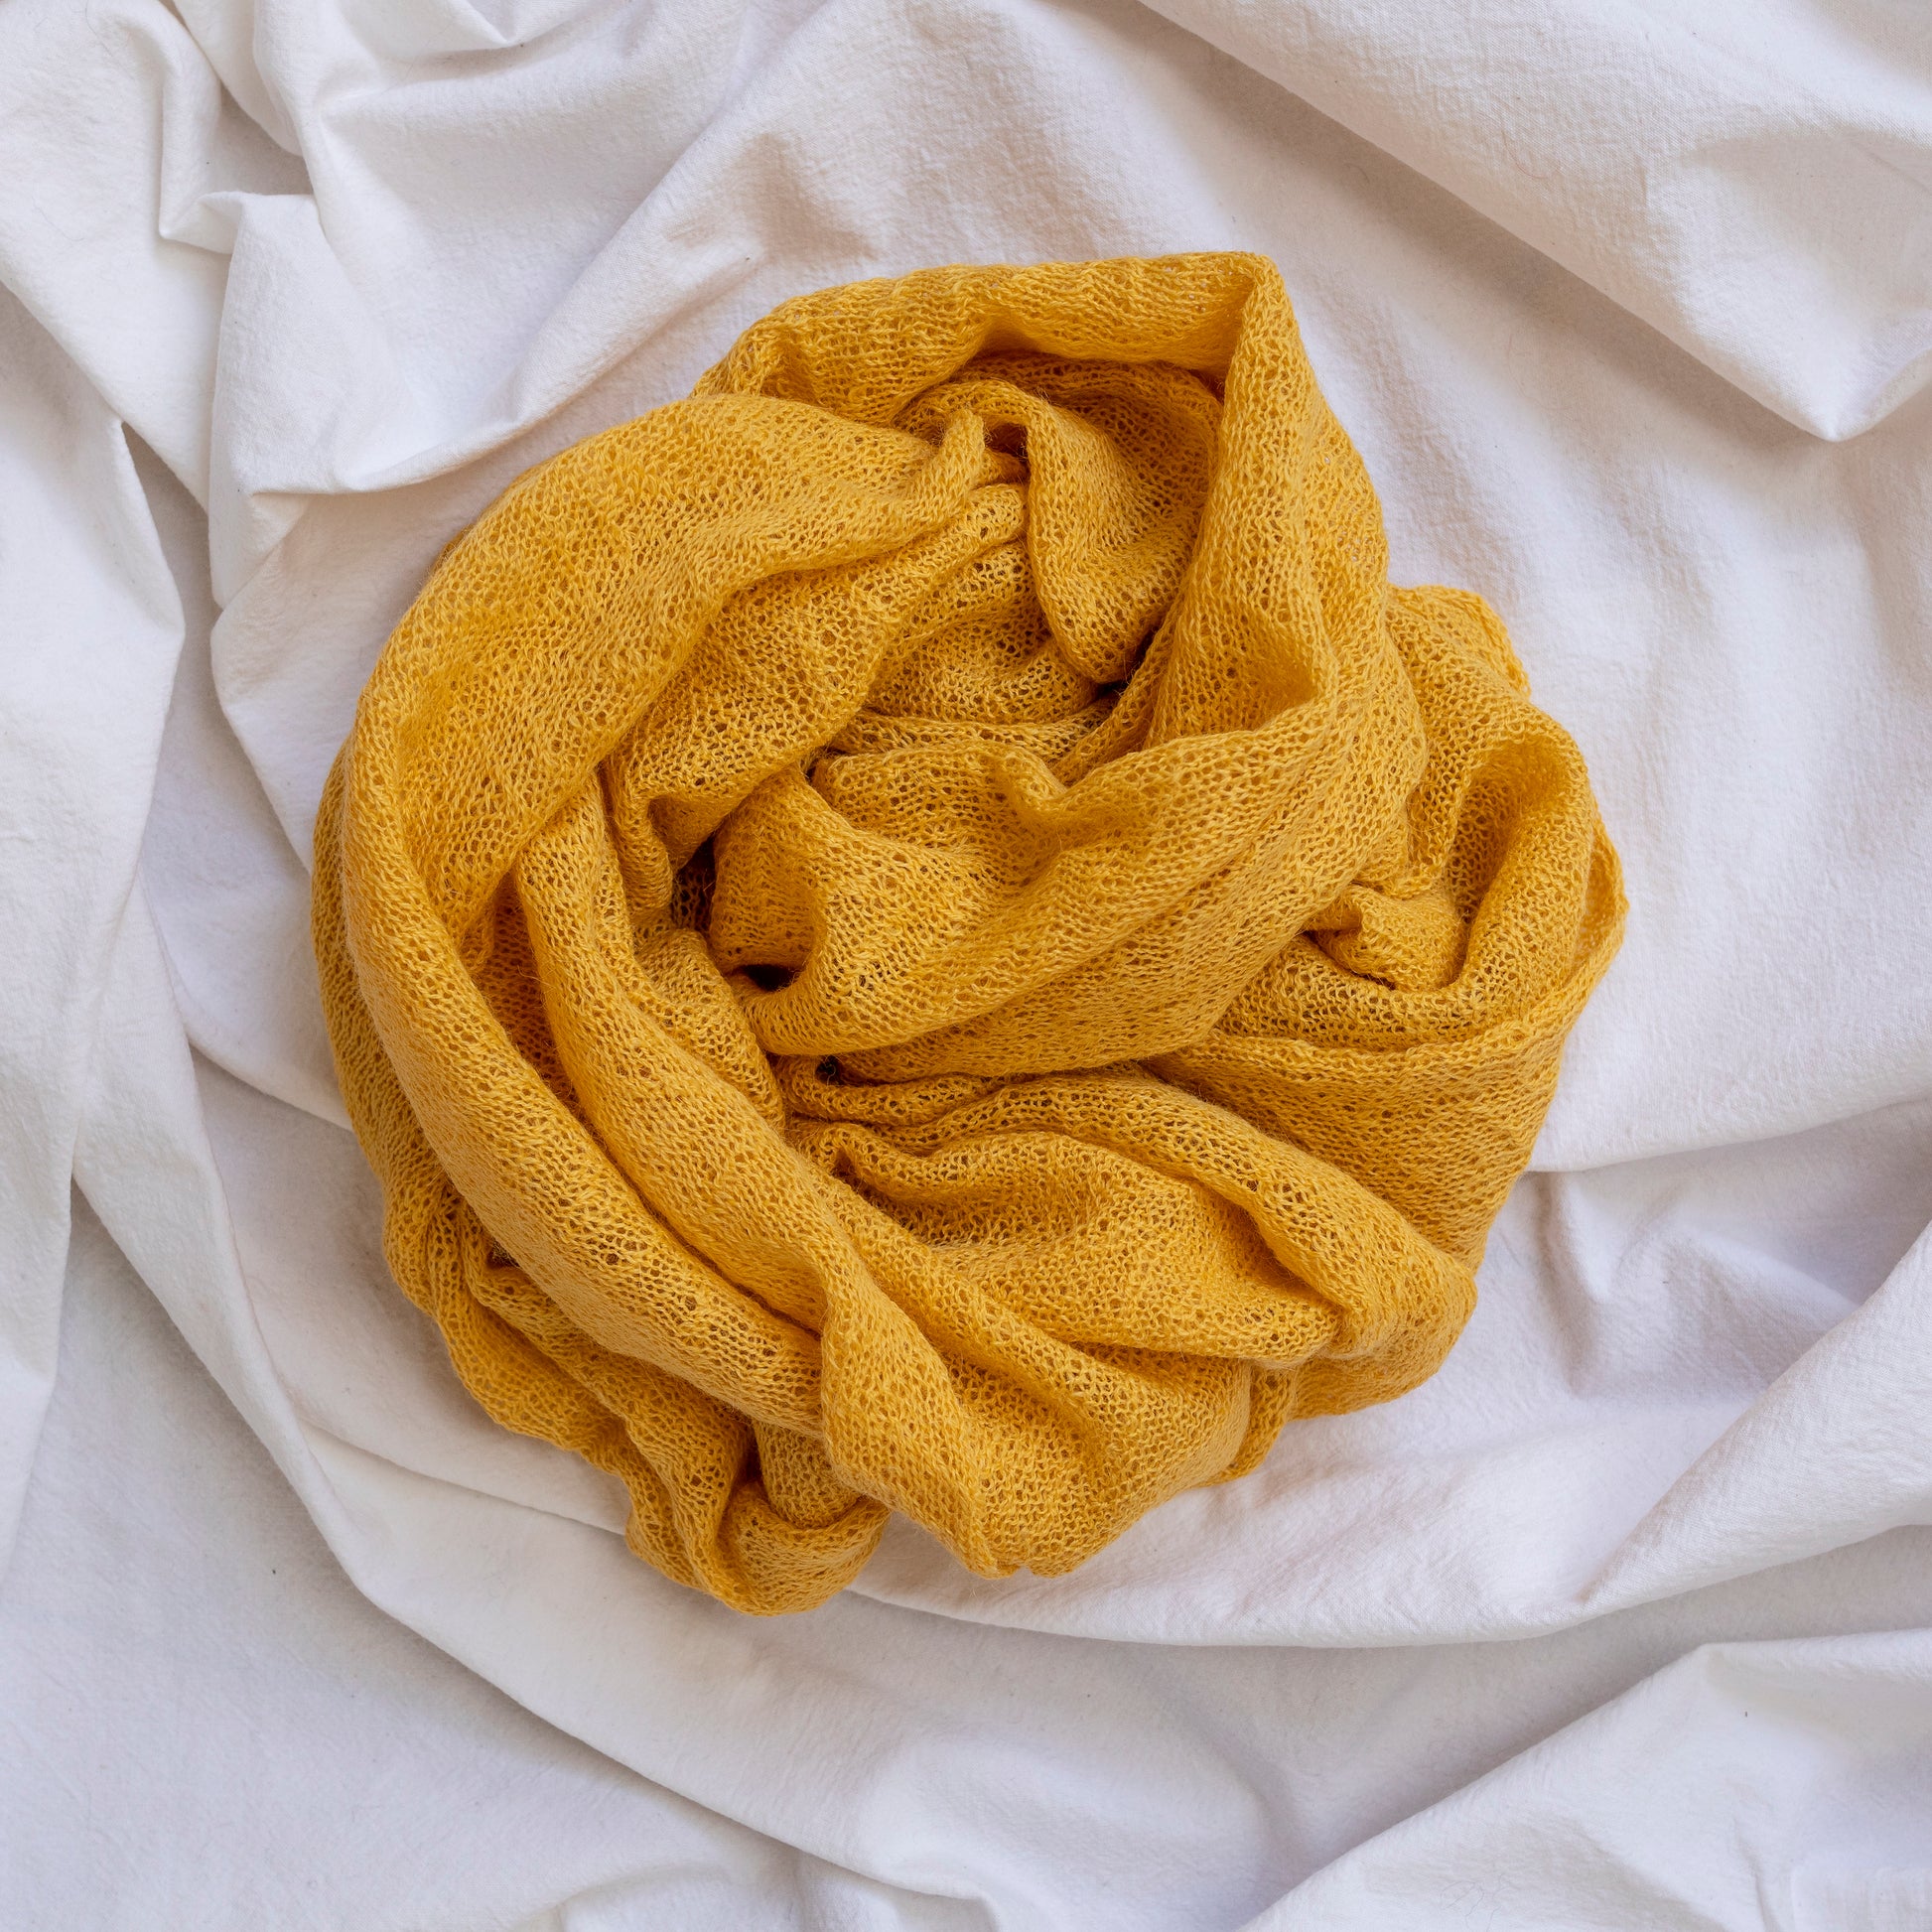 Yellow coloured lightweight and delicately woven scarf. Hand-made by artisans.